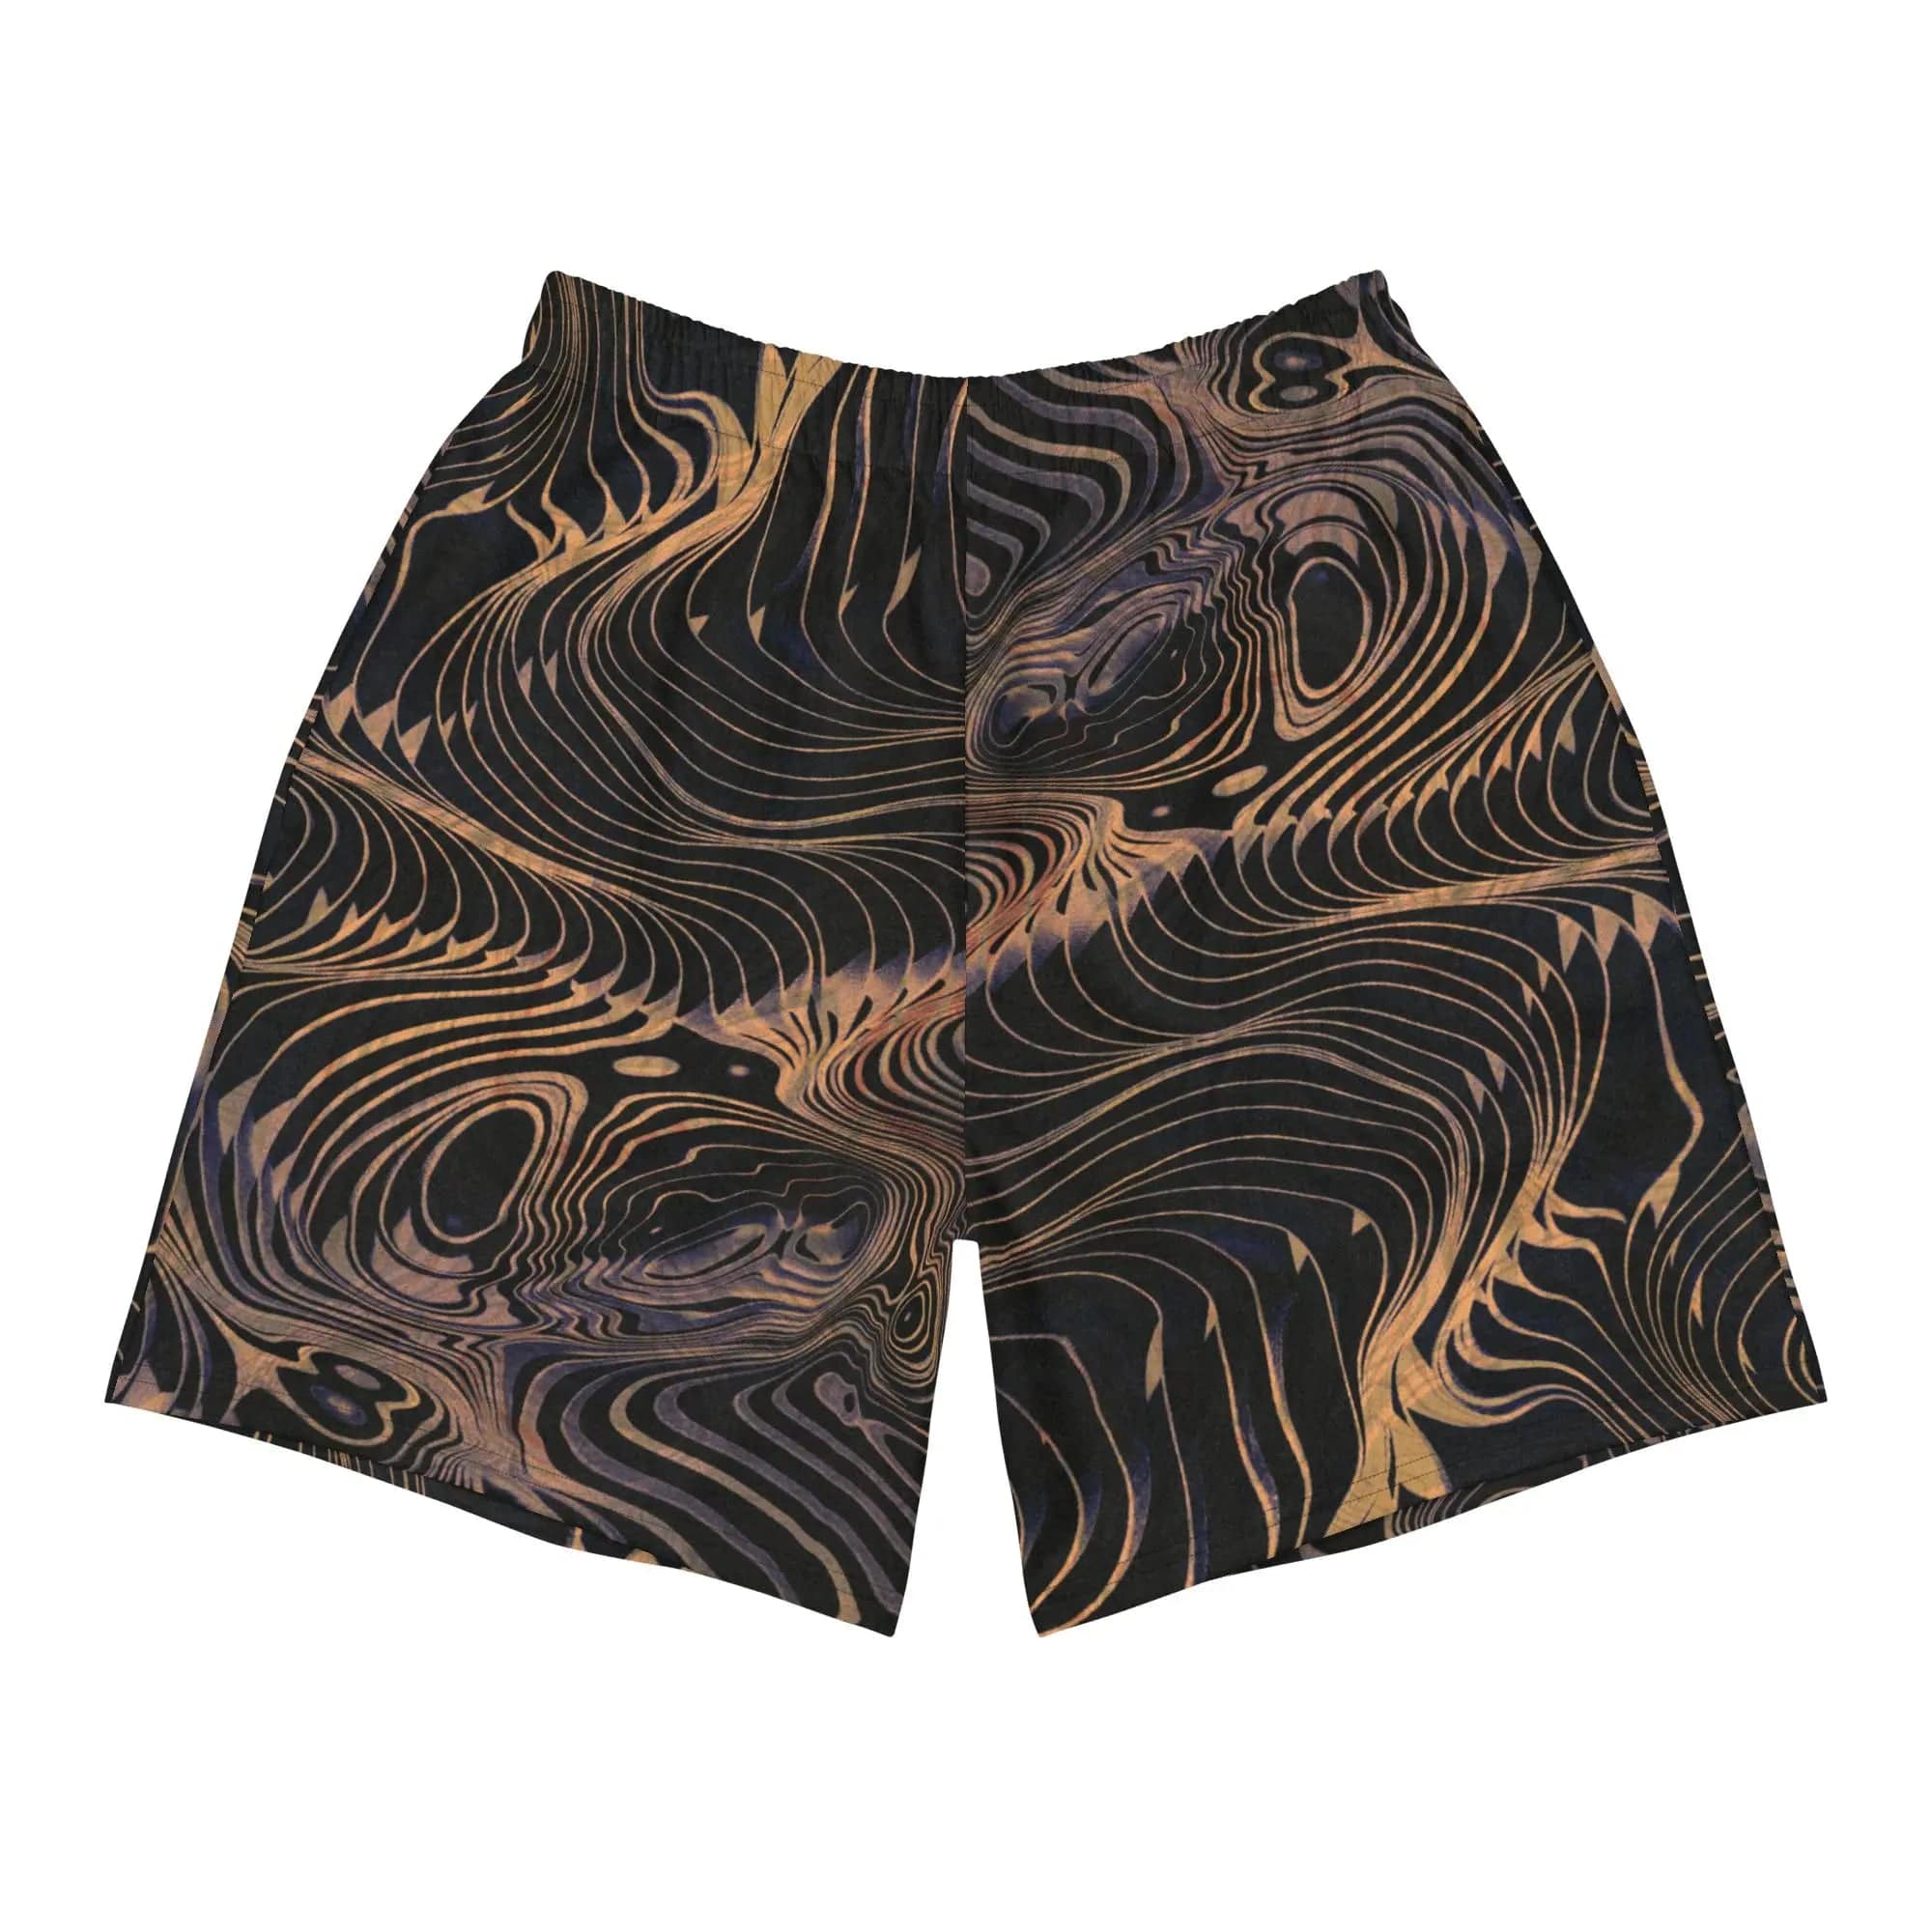 all-over-print-mens-recycled-athletic-shorts-white-front-640c9c6ad15ed-10371187.jpg